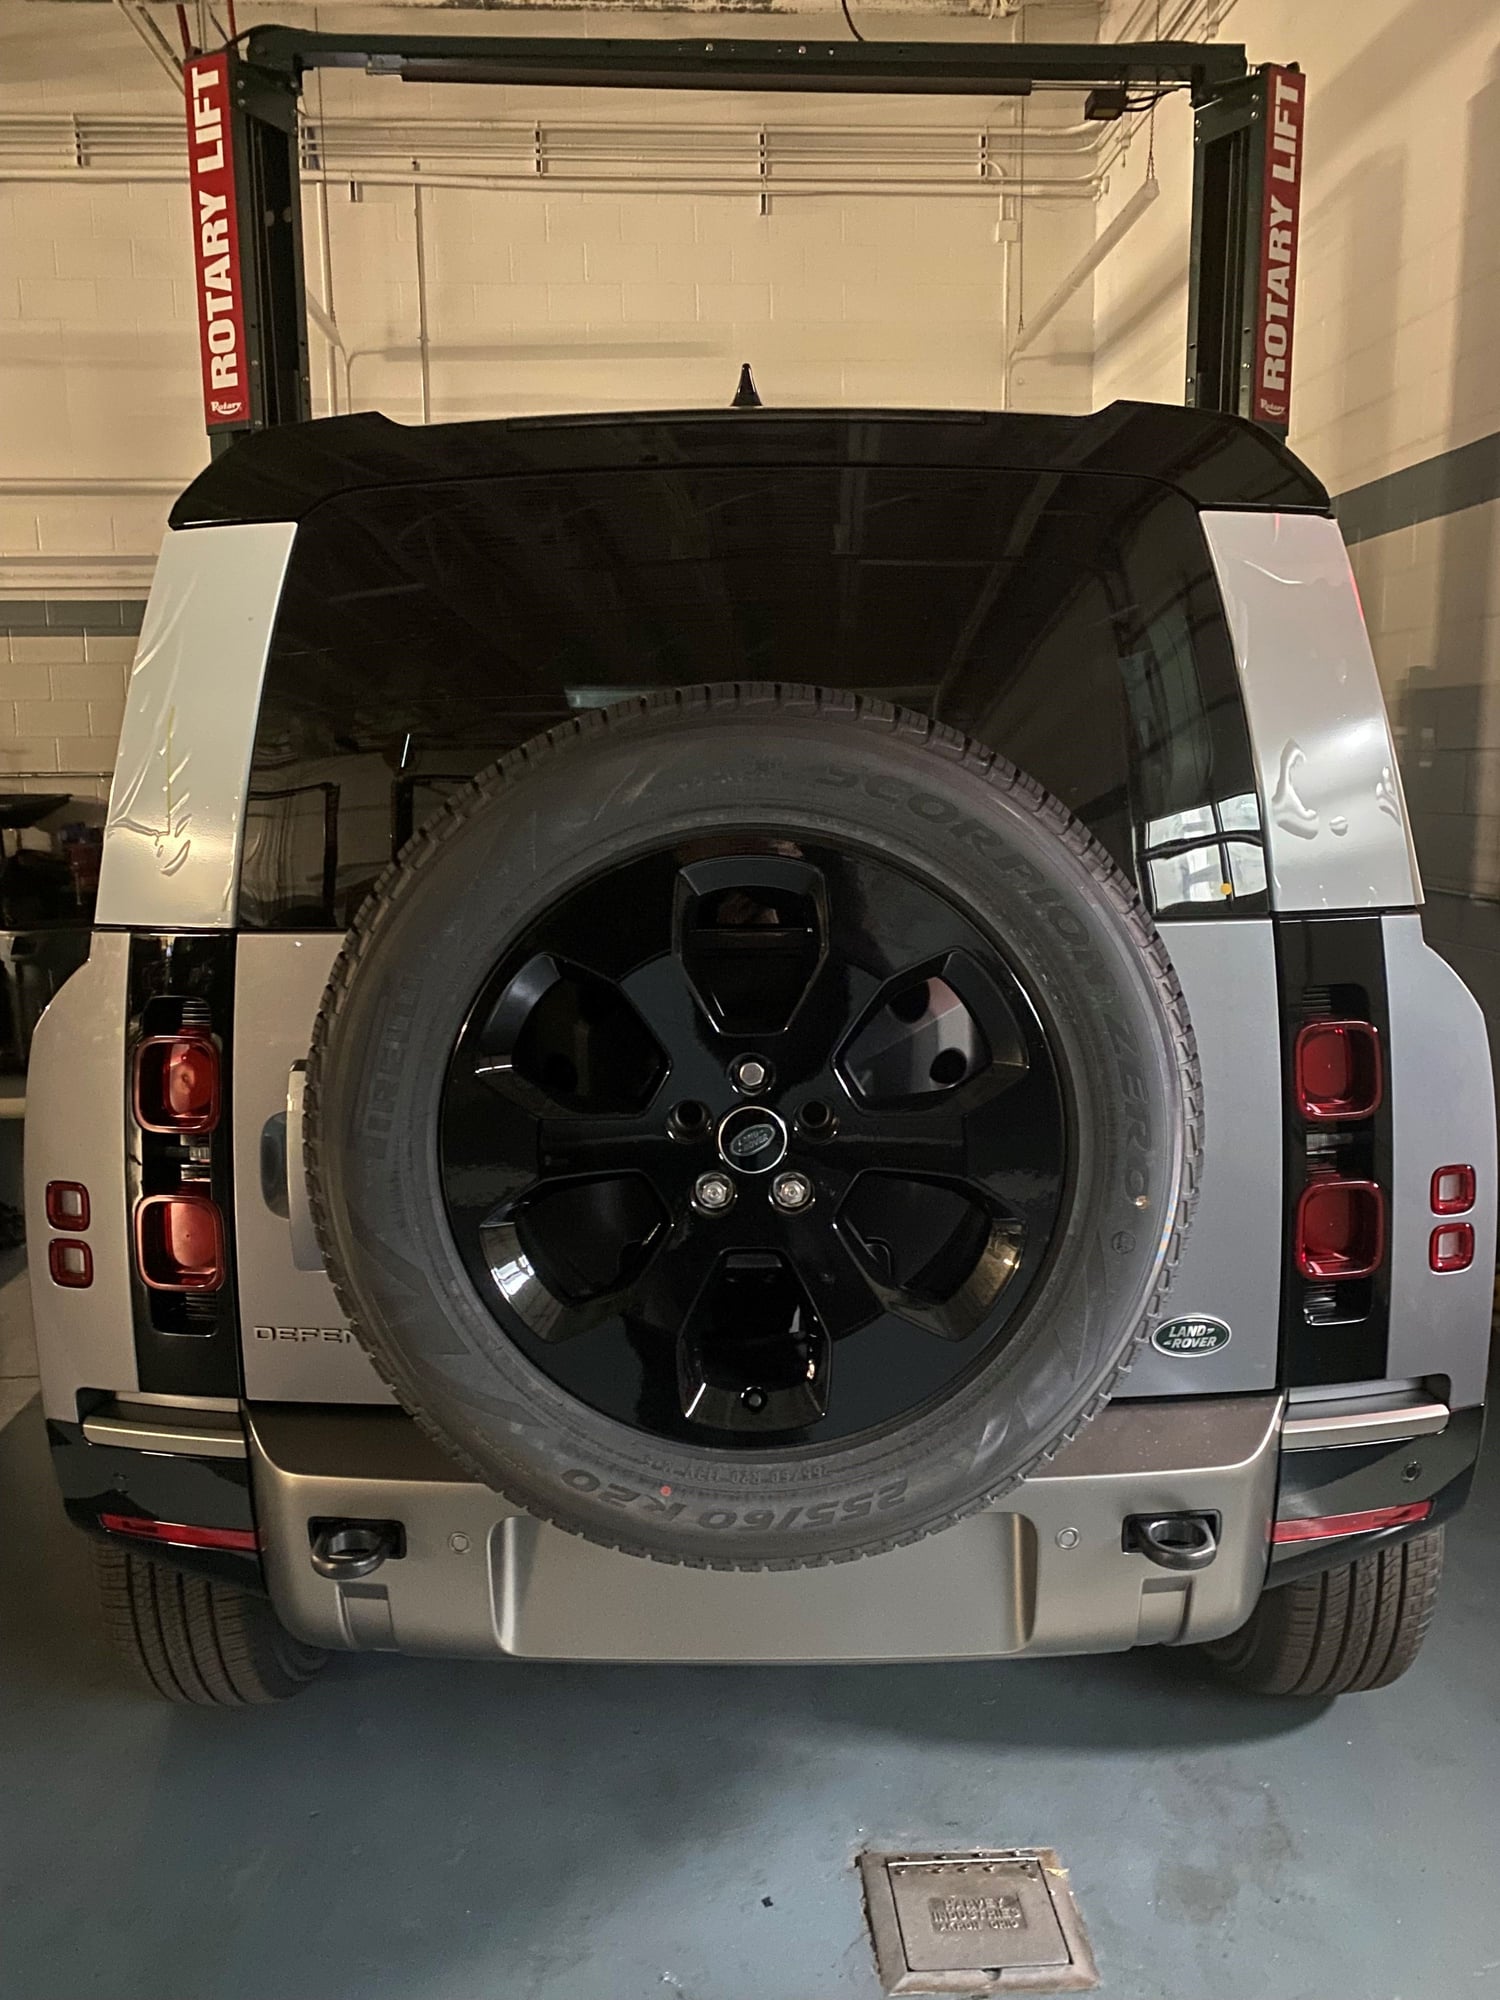 Wheels and Tires/Axles - $2500 - 2022 20" 6011 Style Gloss Black Wheels and Tires (5) - New - 0  All Models - Miami Beach, FL 33139, United States